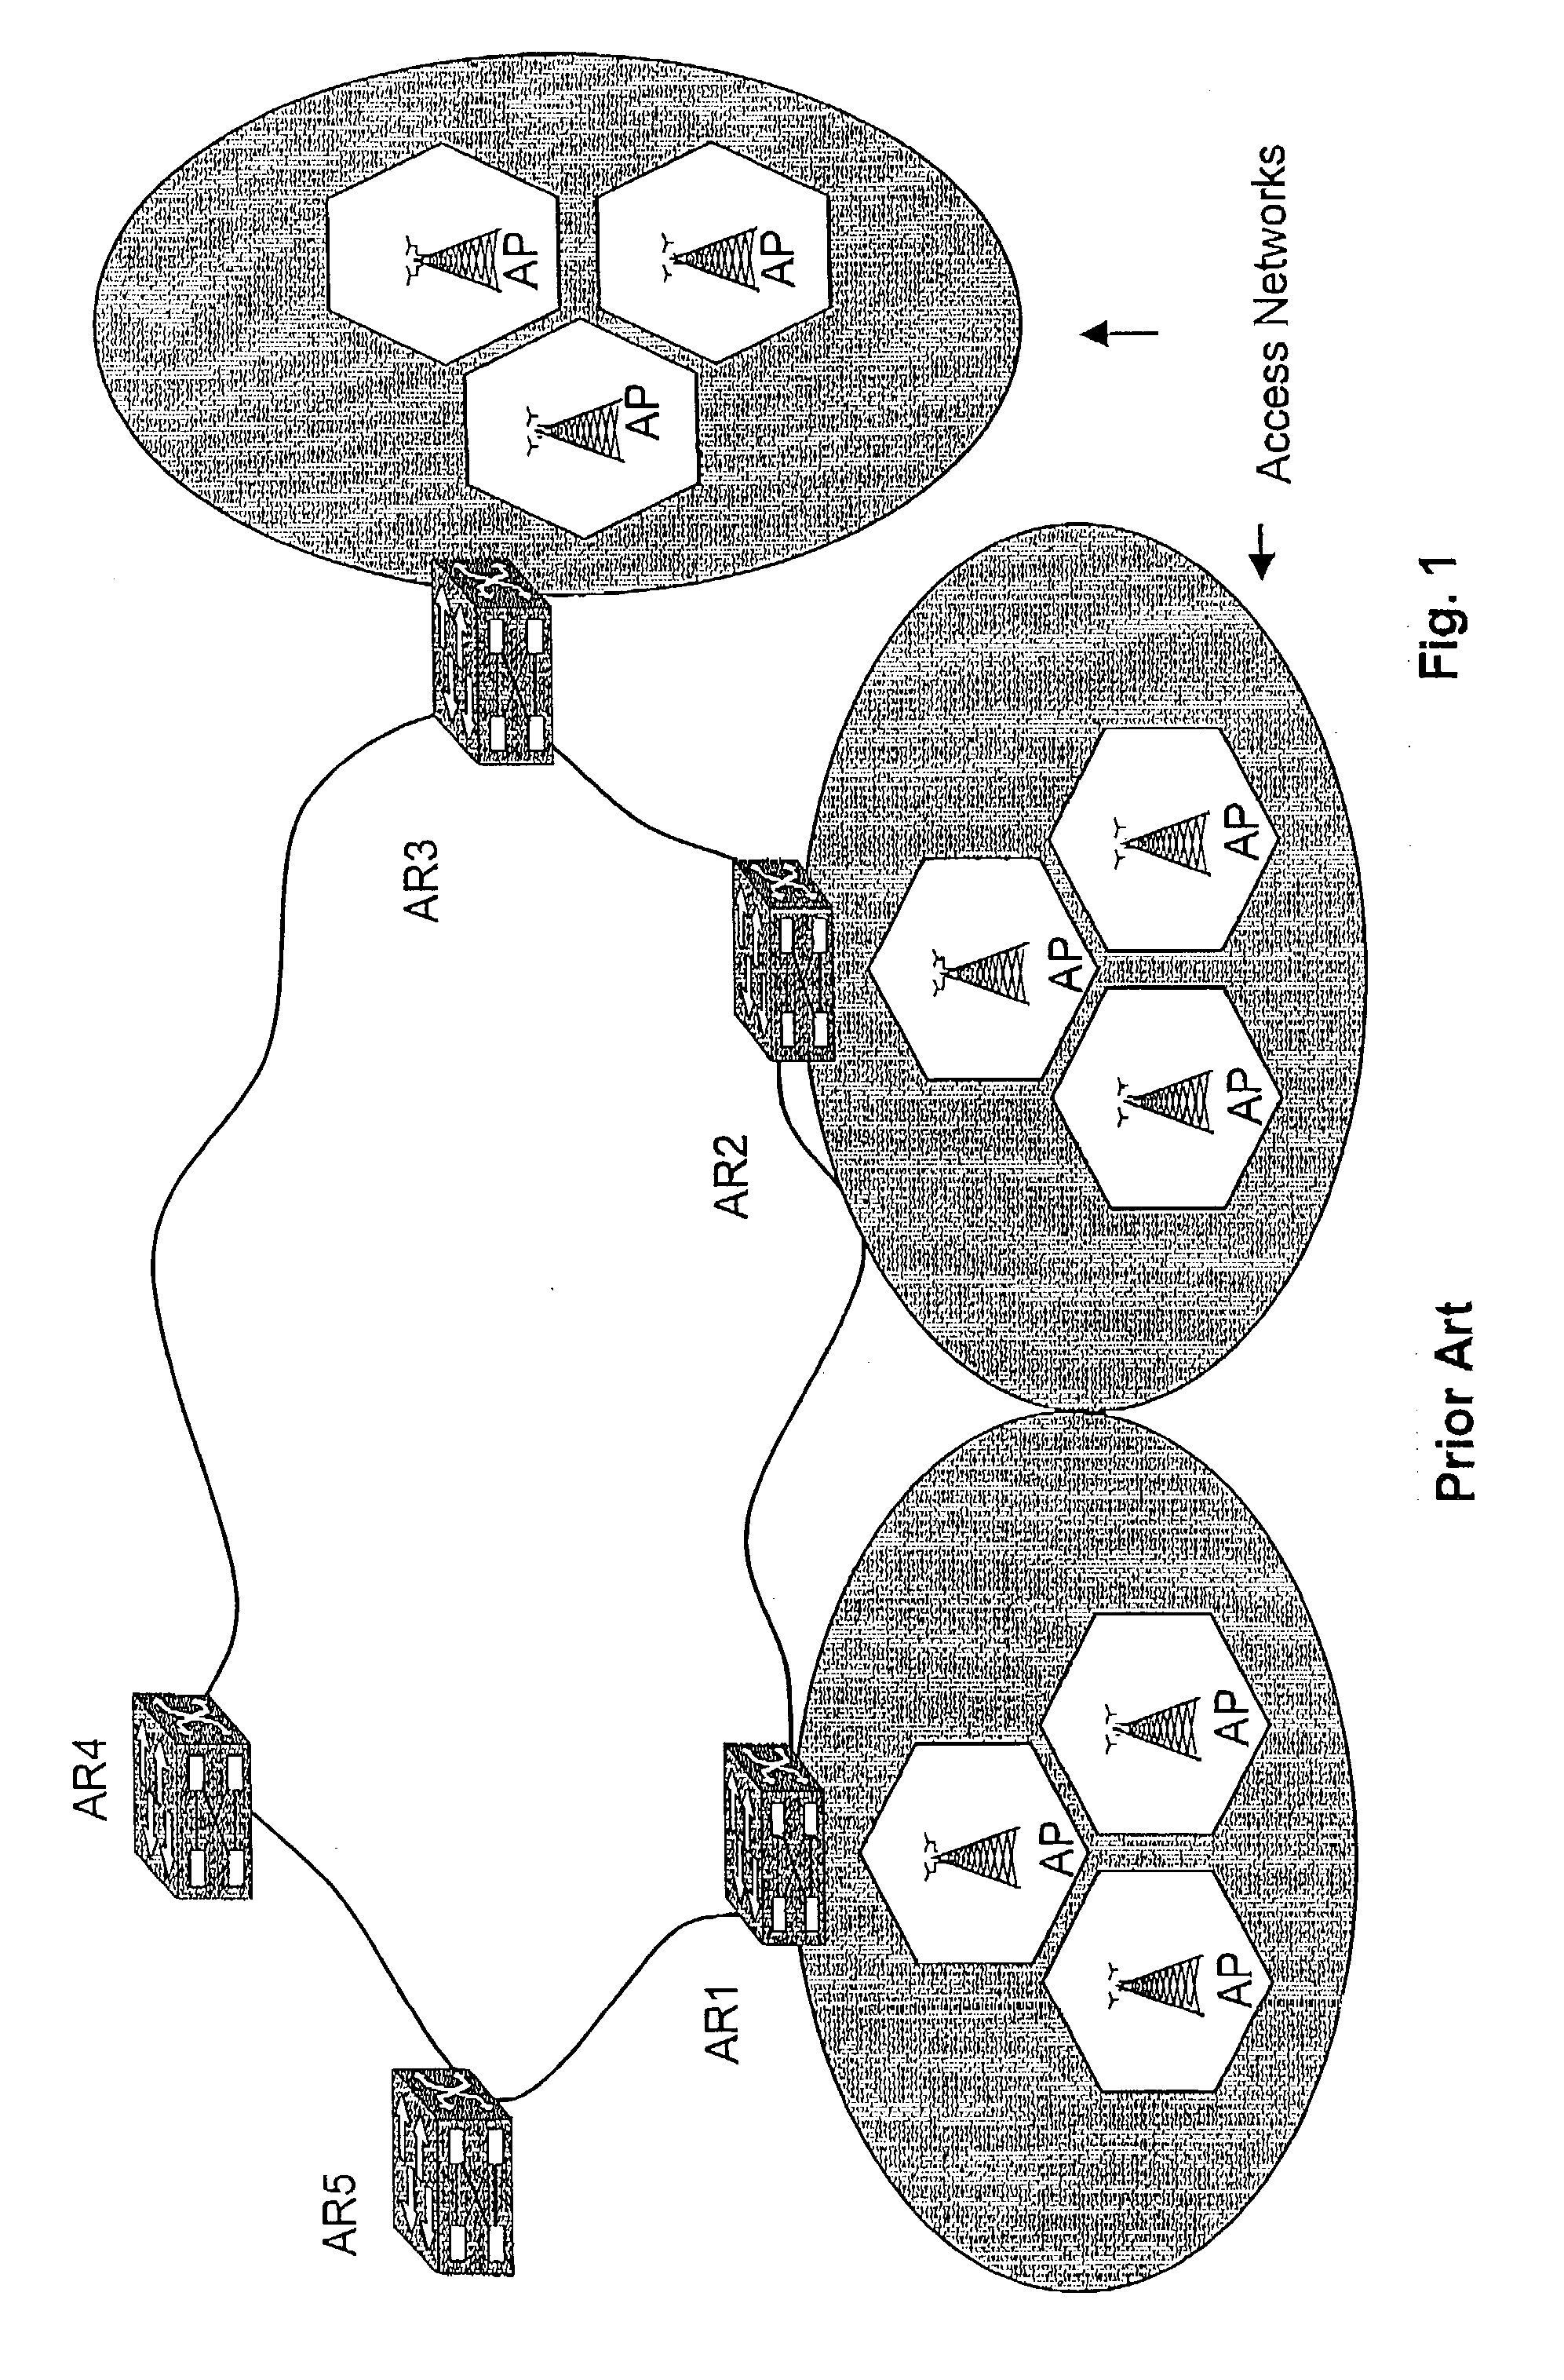 Apparatus and method for providing IP connectivity to mobile nodes during handover